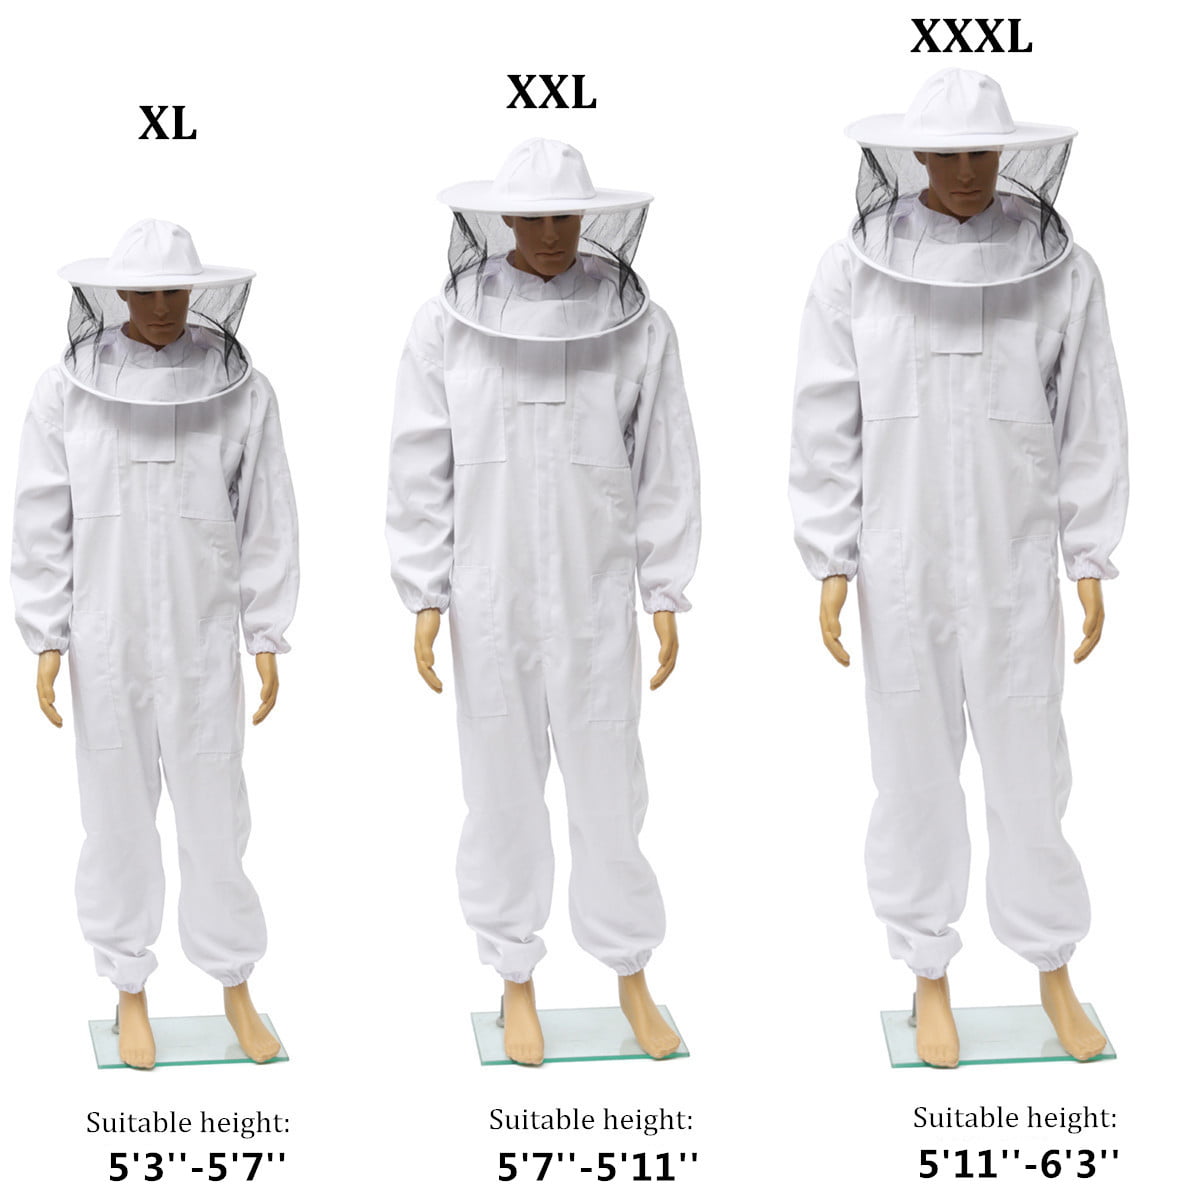 2XL F Fityle Unisex Beekeeper Costume Super Thick Beekeeping Suit Anti-wasp Fabric Elastic Cuffs Detachable Hat White